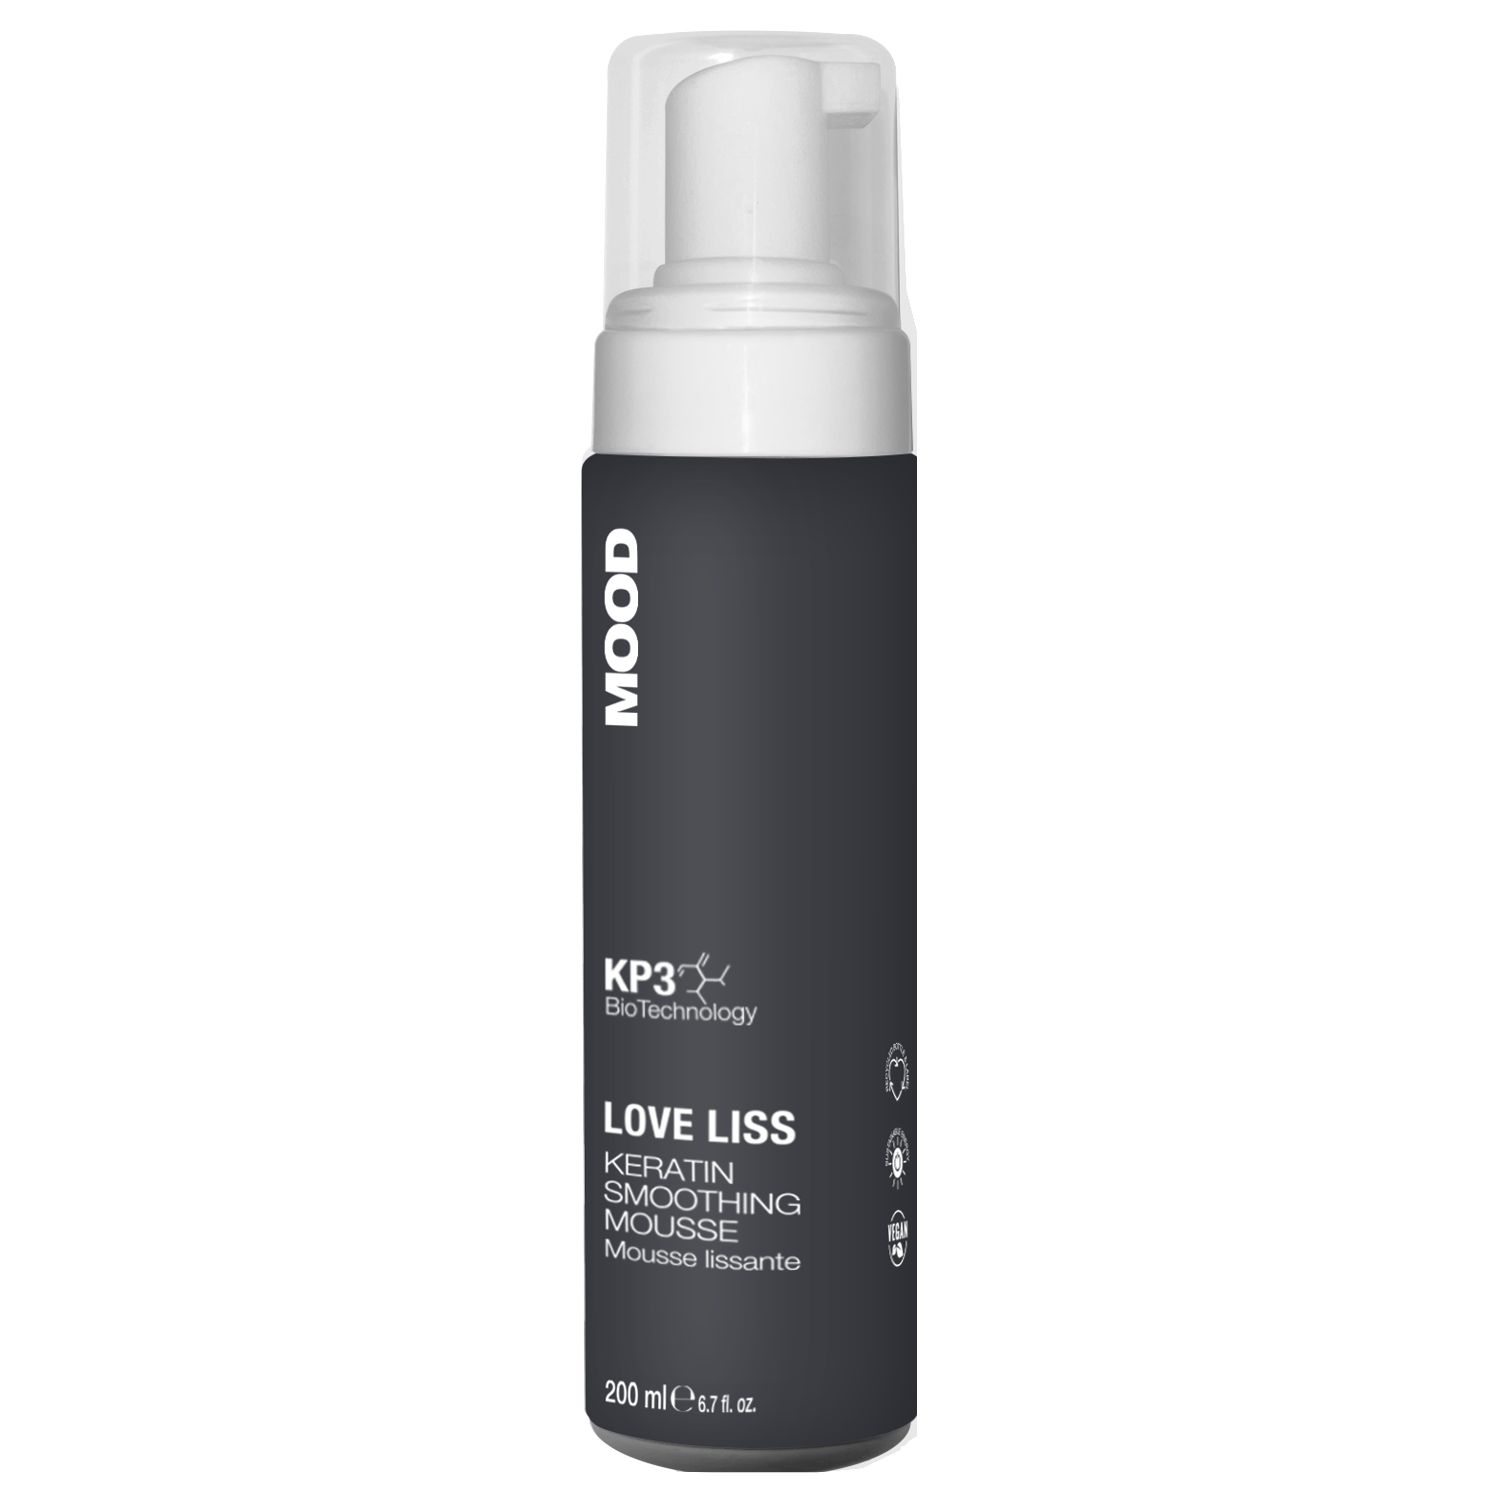 MOOD Love Liss Keratin Smoothing Mousse 200 ml